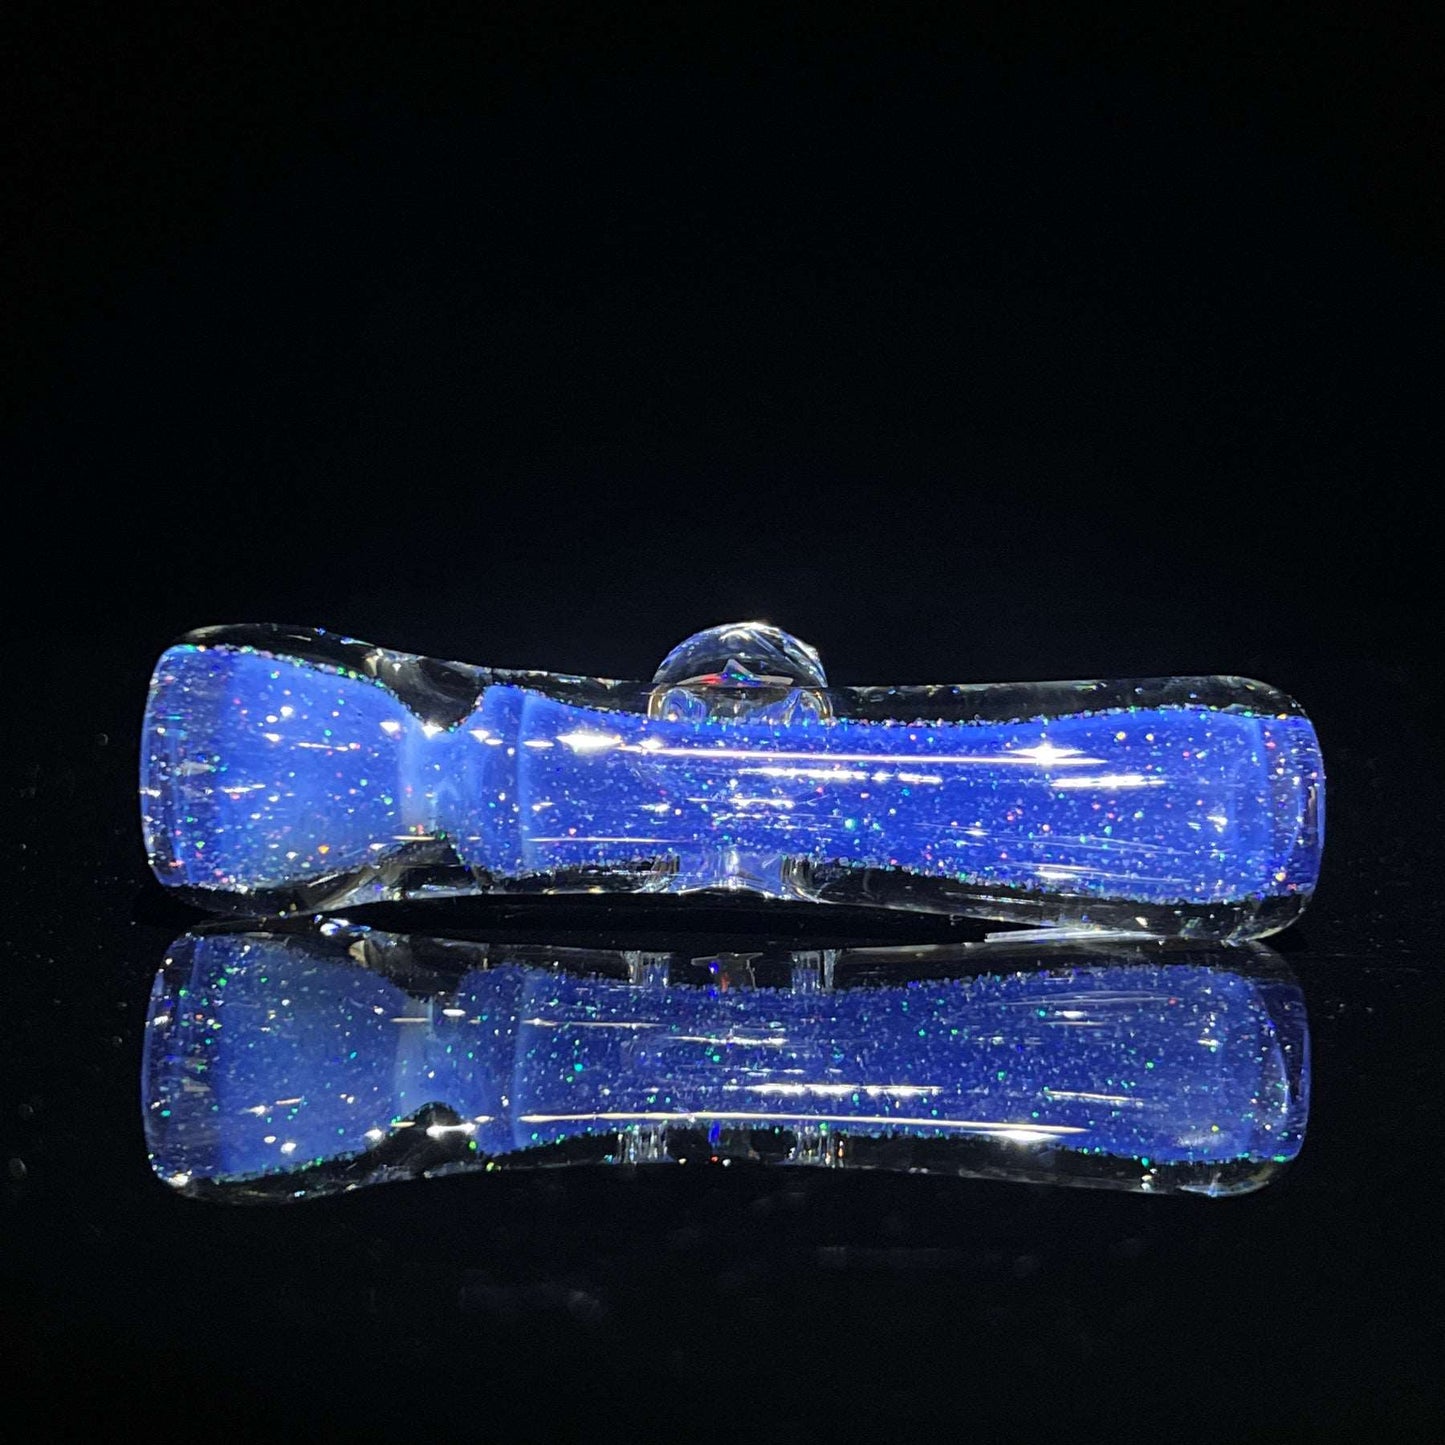 Onlybongs Chill Chillum Water Pipe | Not That High